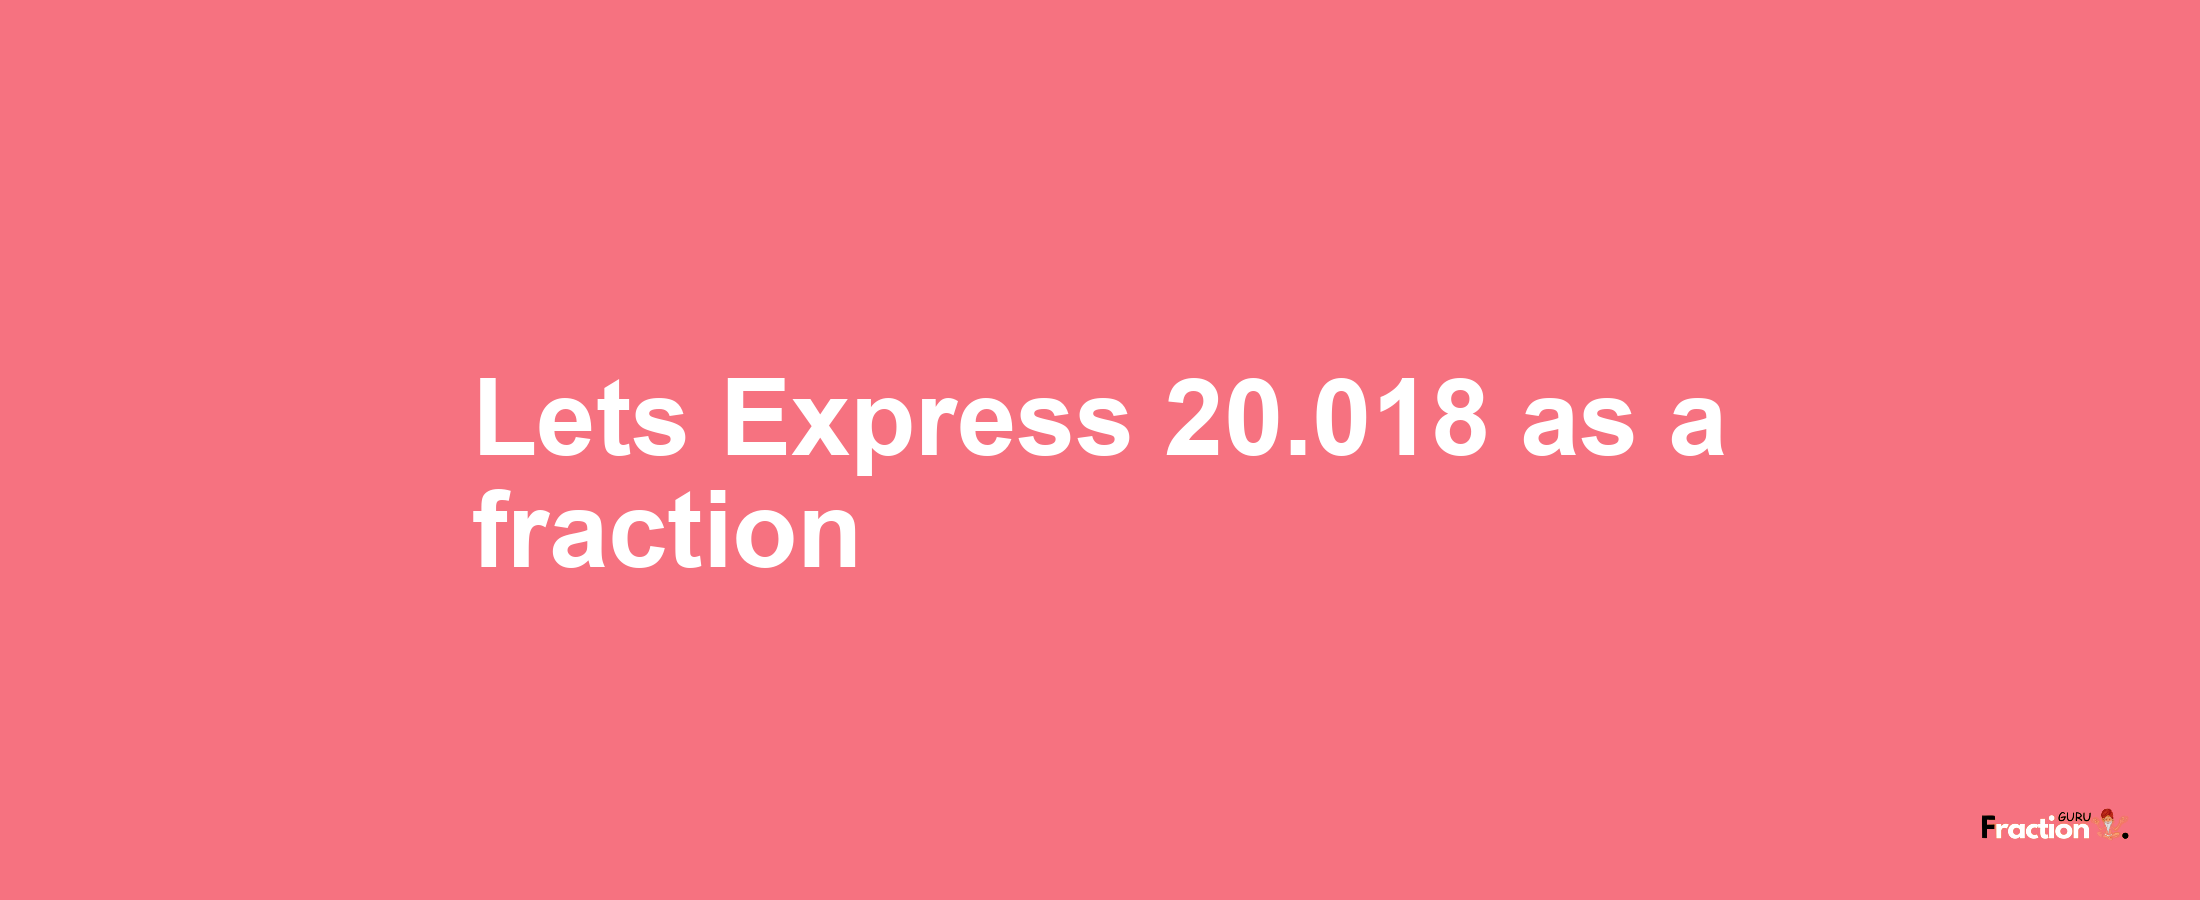 Lets Express 20.018 as afraction